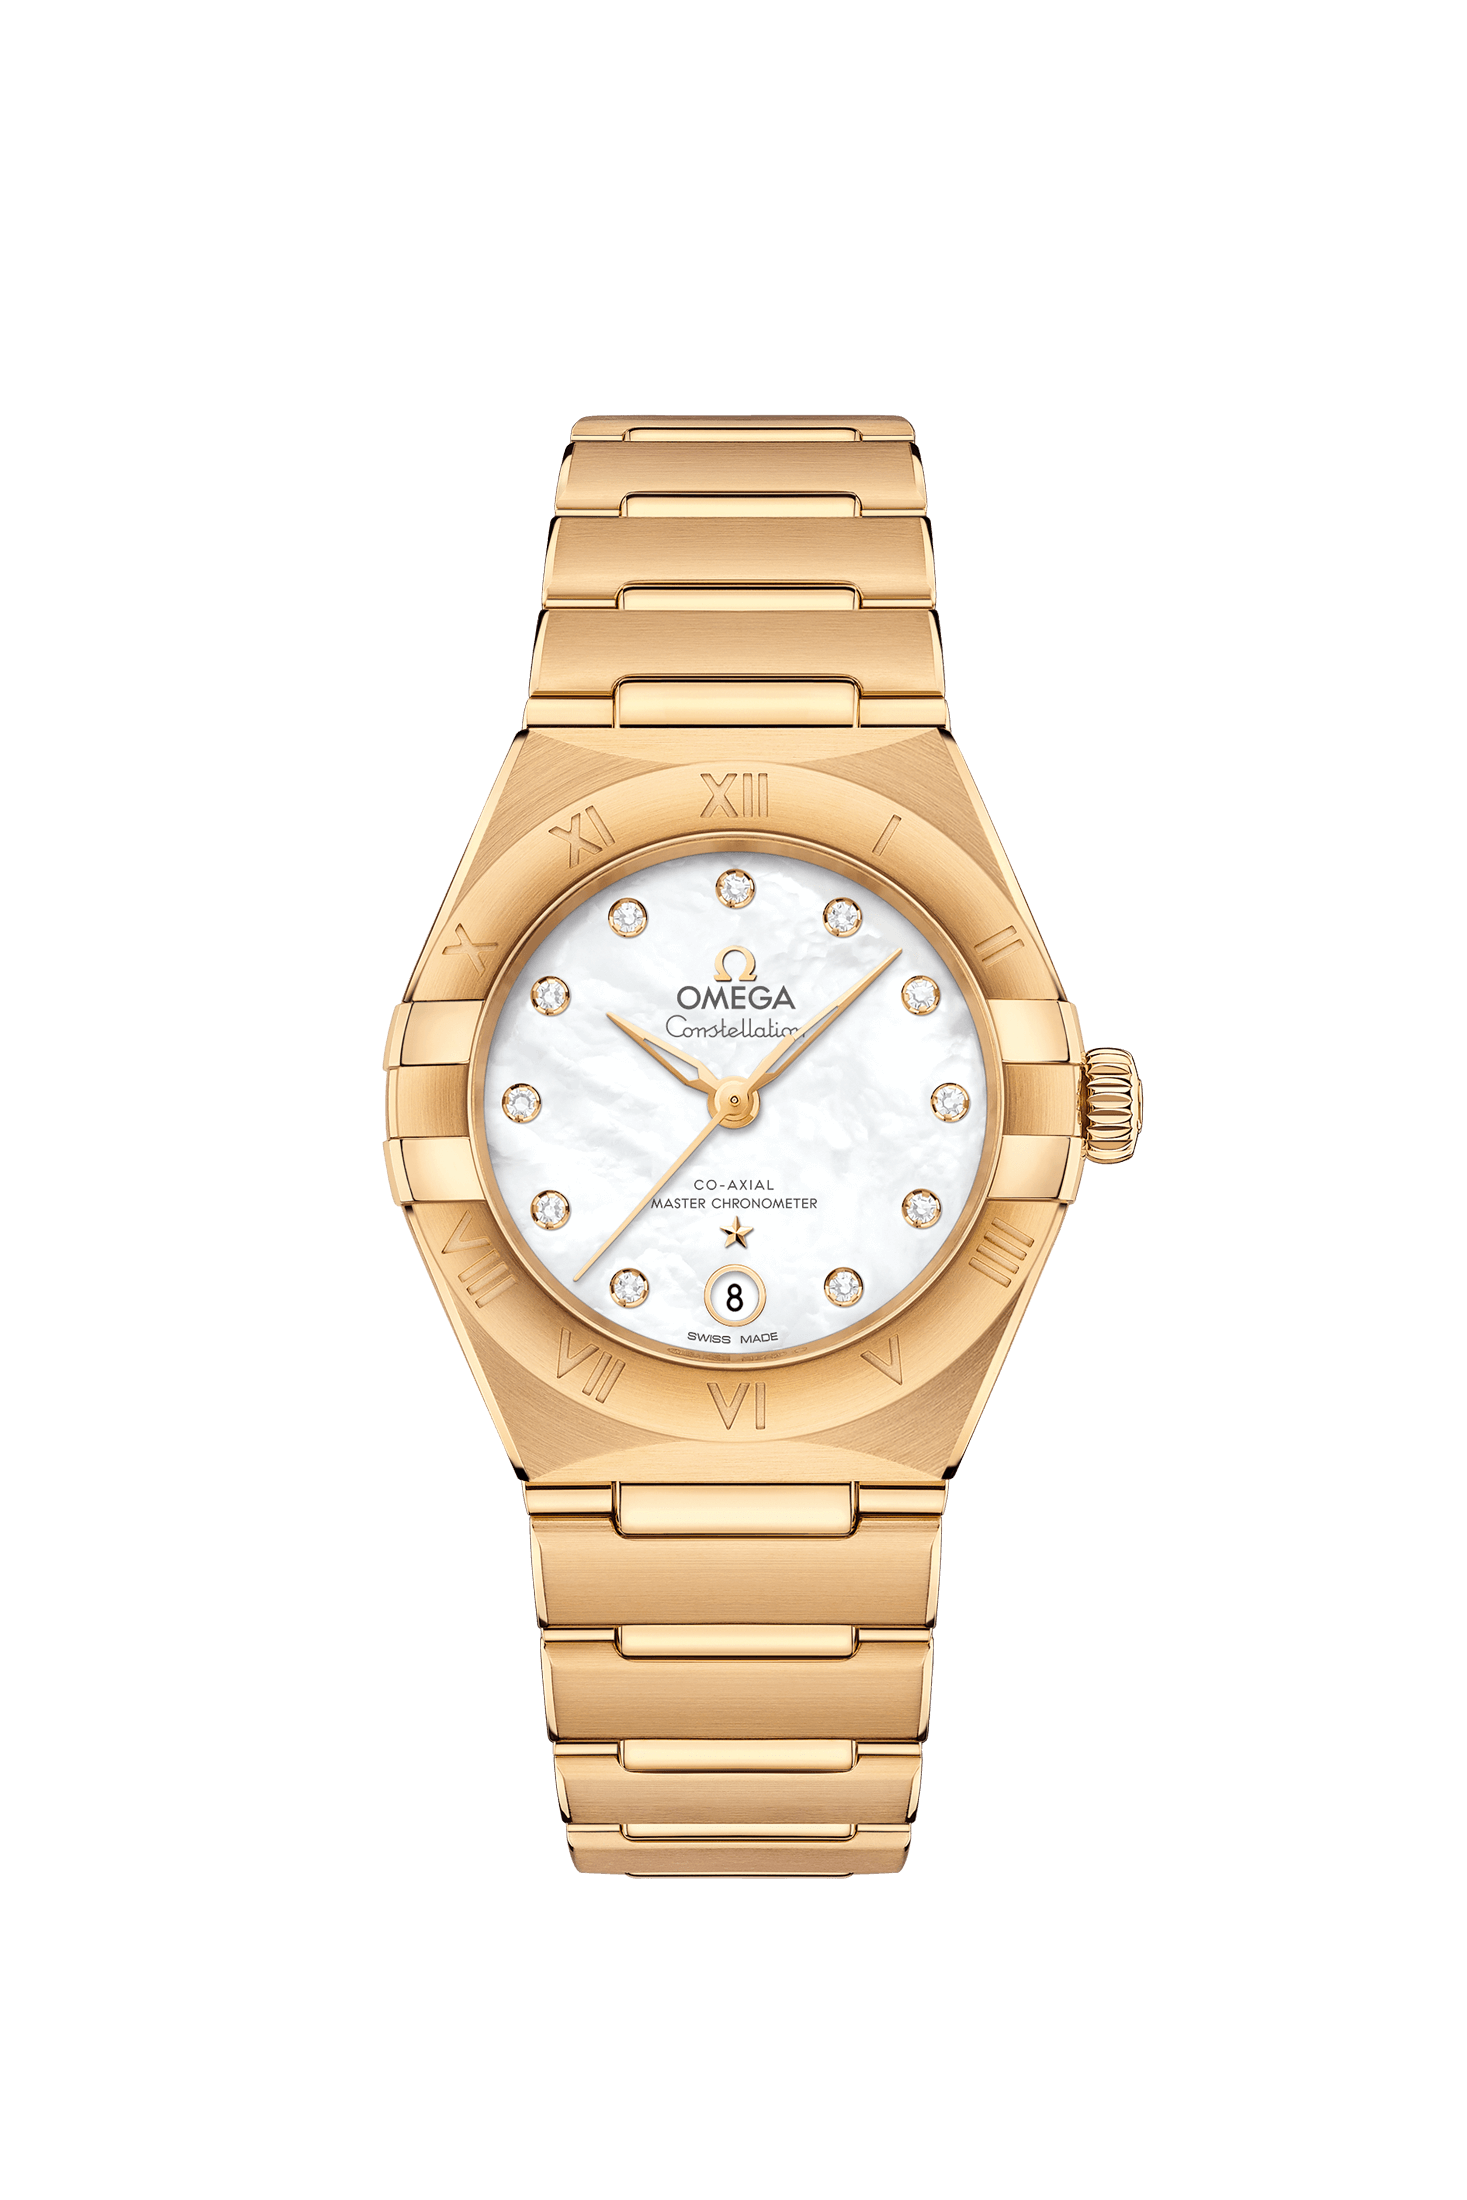 Ladies' watch  OMEGA, Constellation Co Axial Master Chronometer / 29mm, SKU: 131.50.29.20.55.002 | watchapproach.com